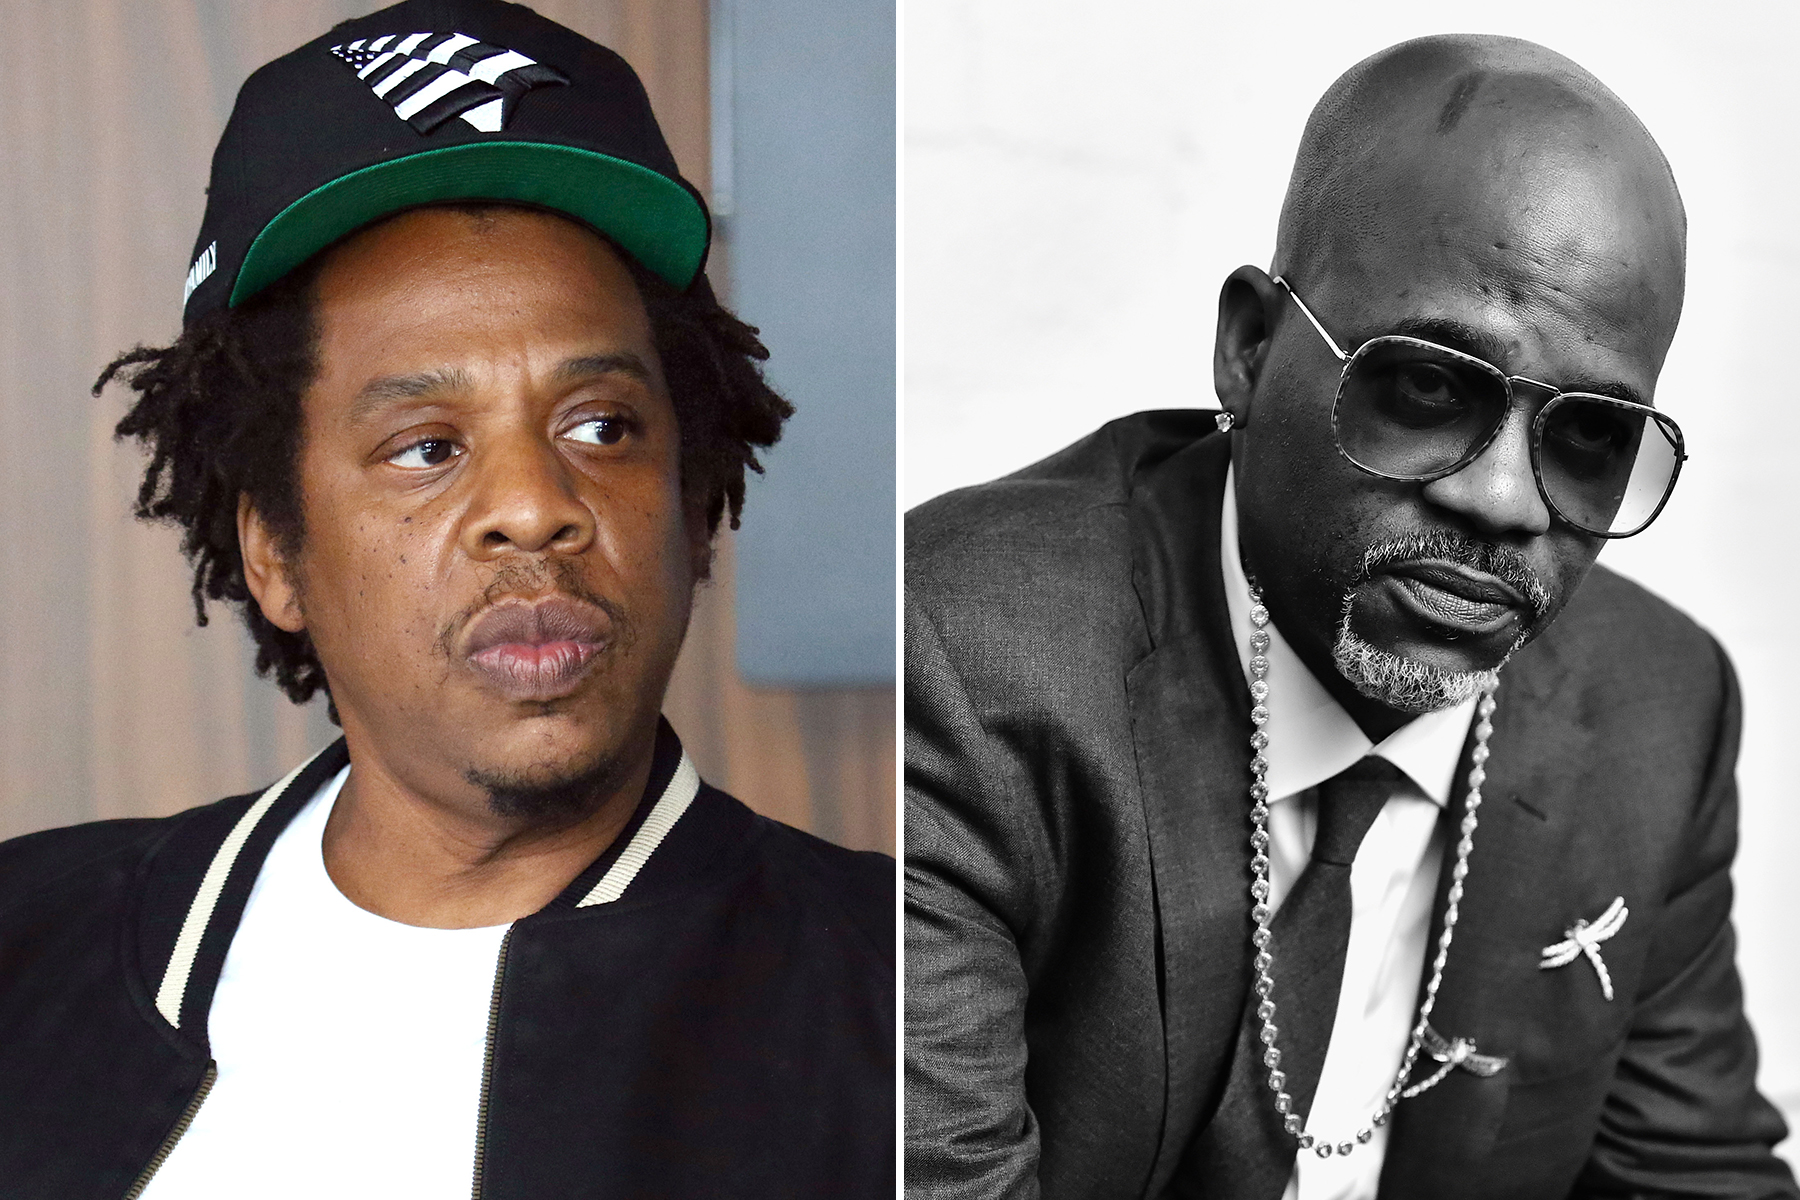 Dame Dash Prohibited From Selling Jay-Z’s ‘Reasonable Doubt’ as NFT Following Roc-A-Fella Lawsuit